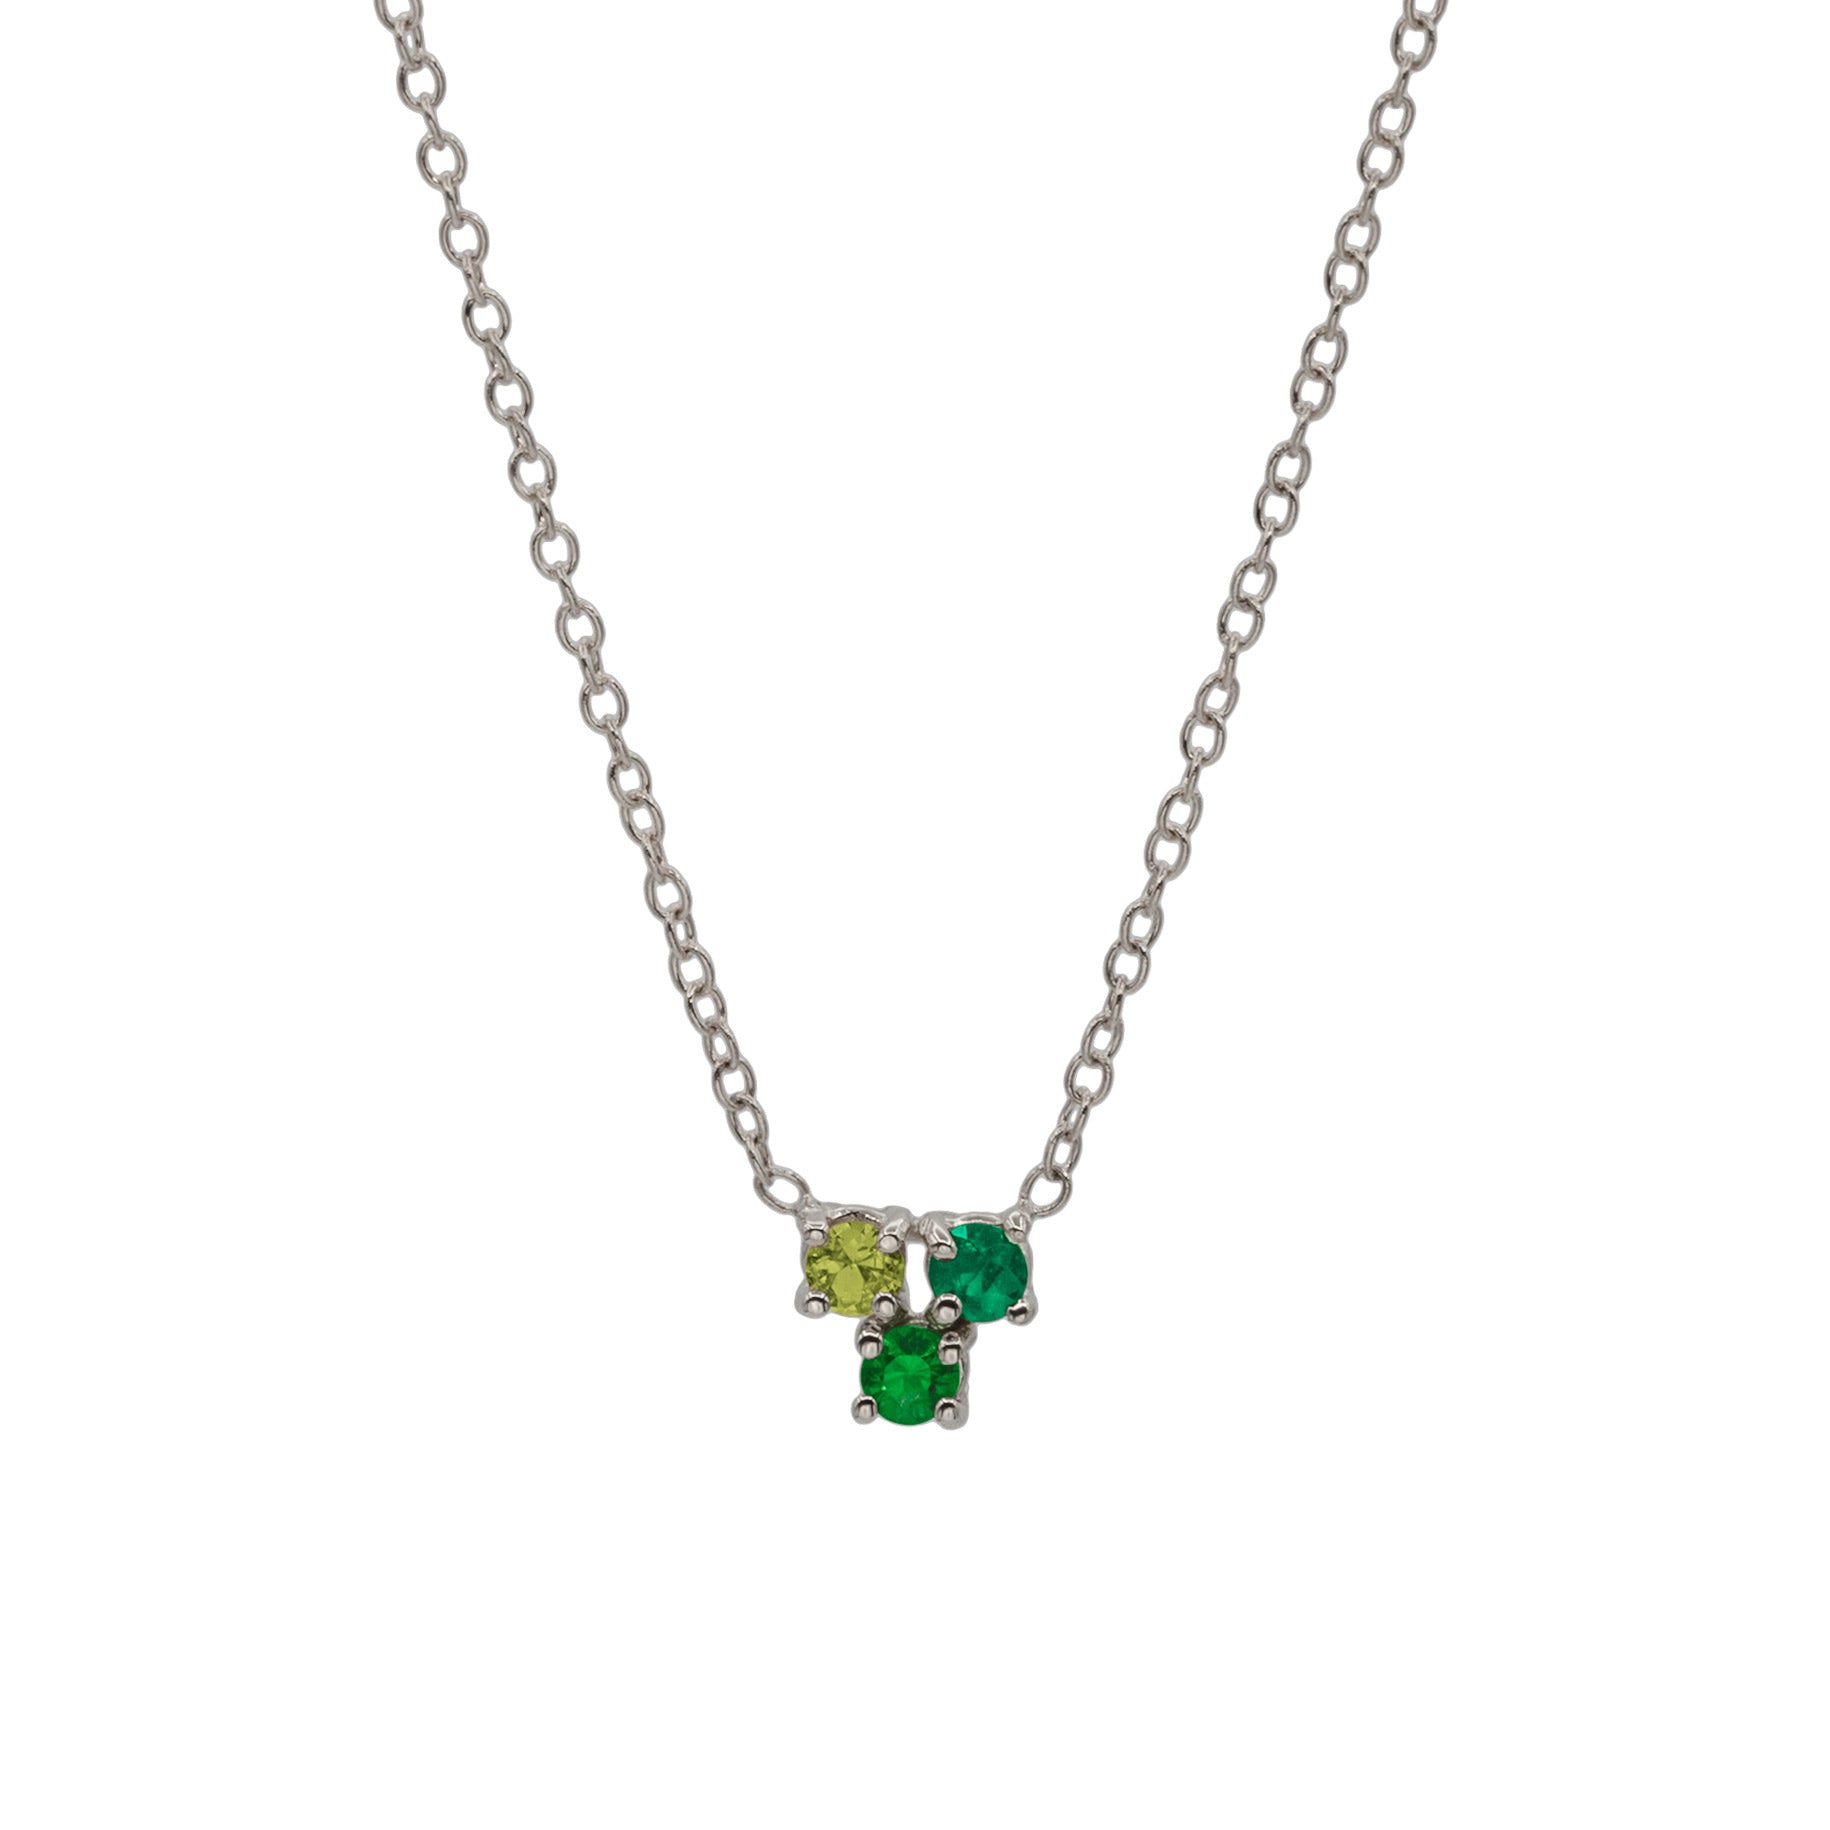 Trio necklace sterling silver with green gemstones